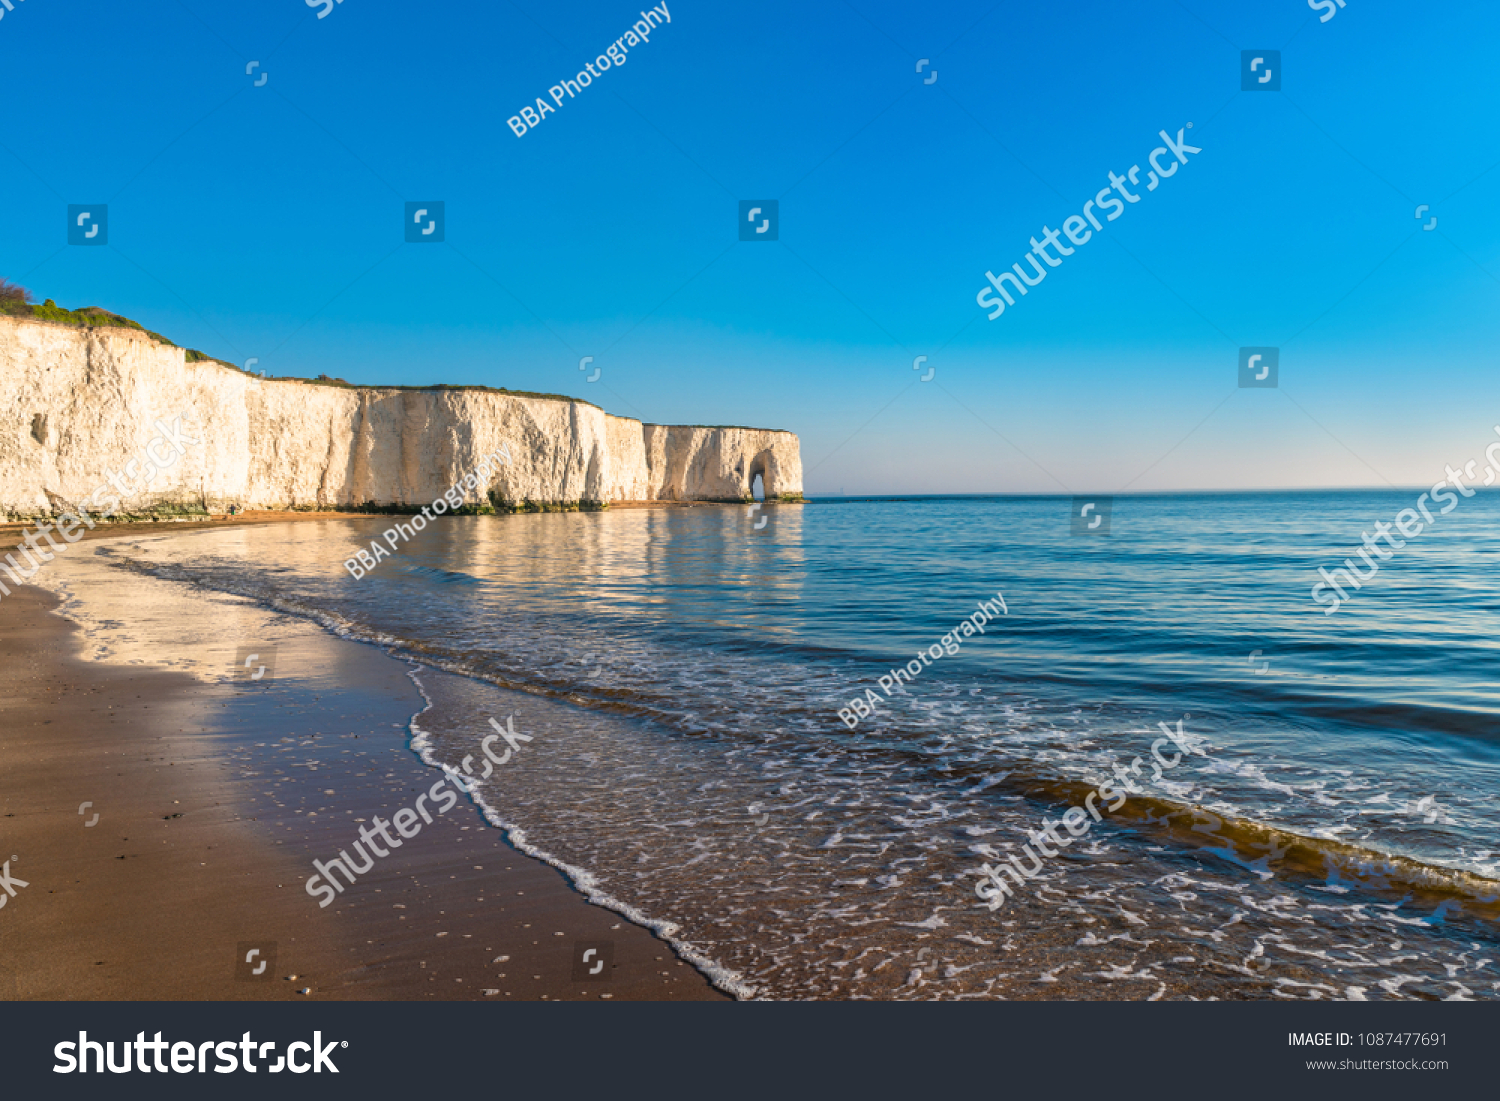 View of white chalk cliffs and beach in Kingsgate Bay, Margate, East Kent, UK #1087477691